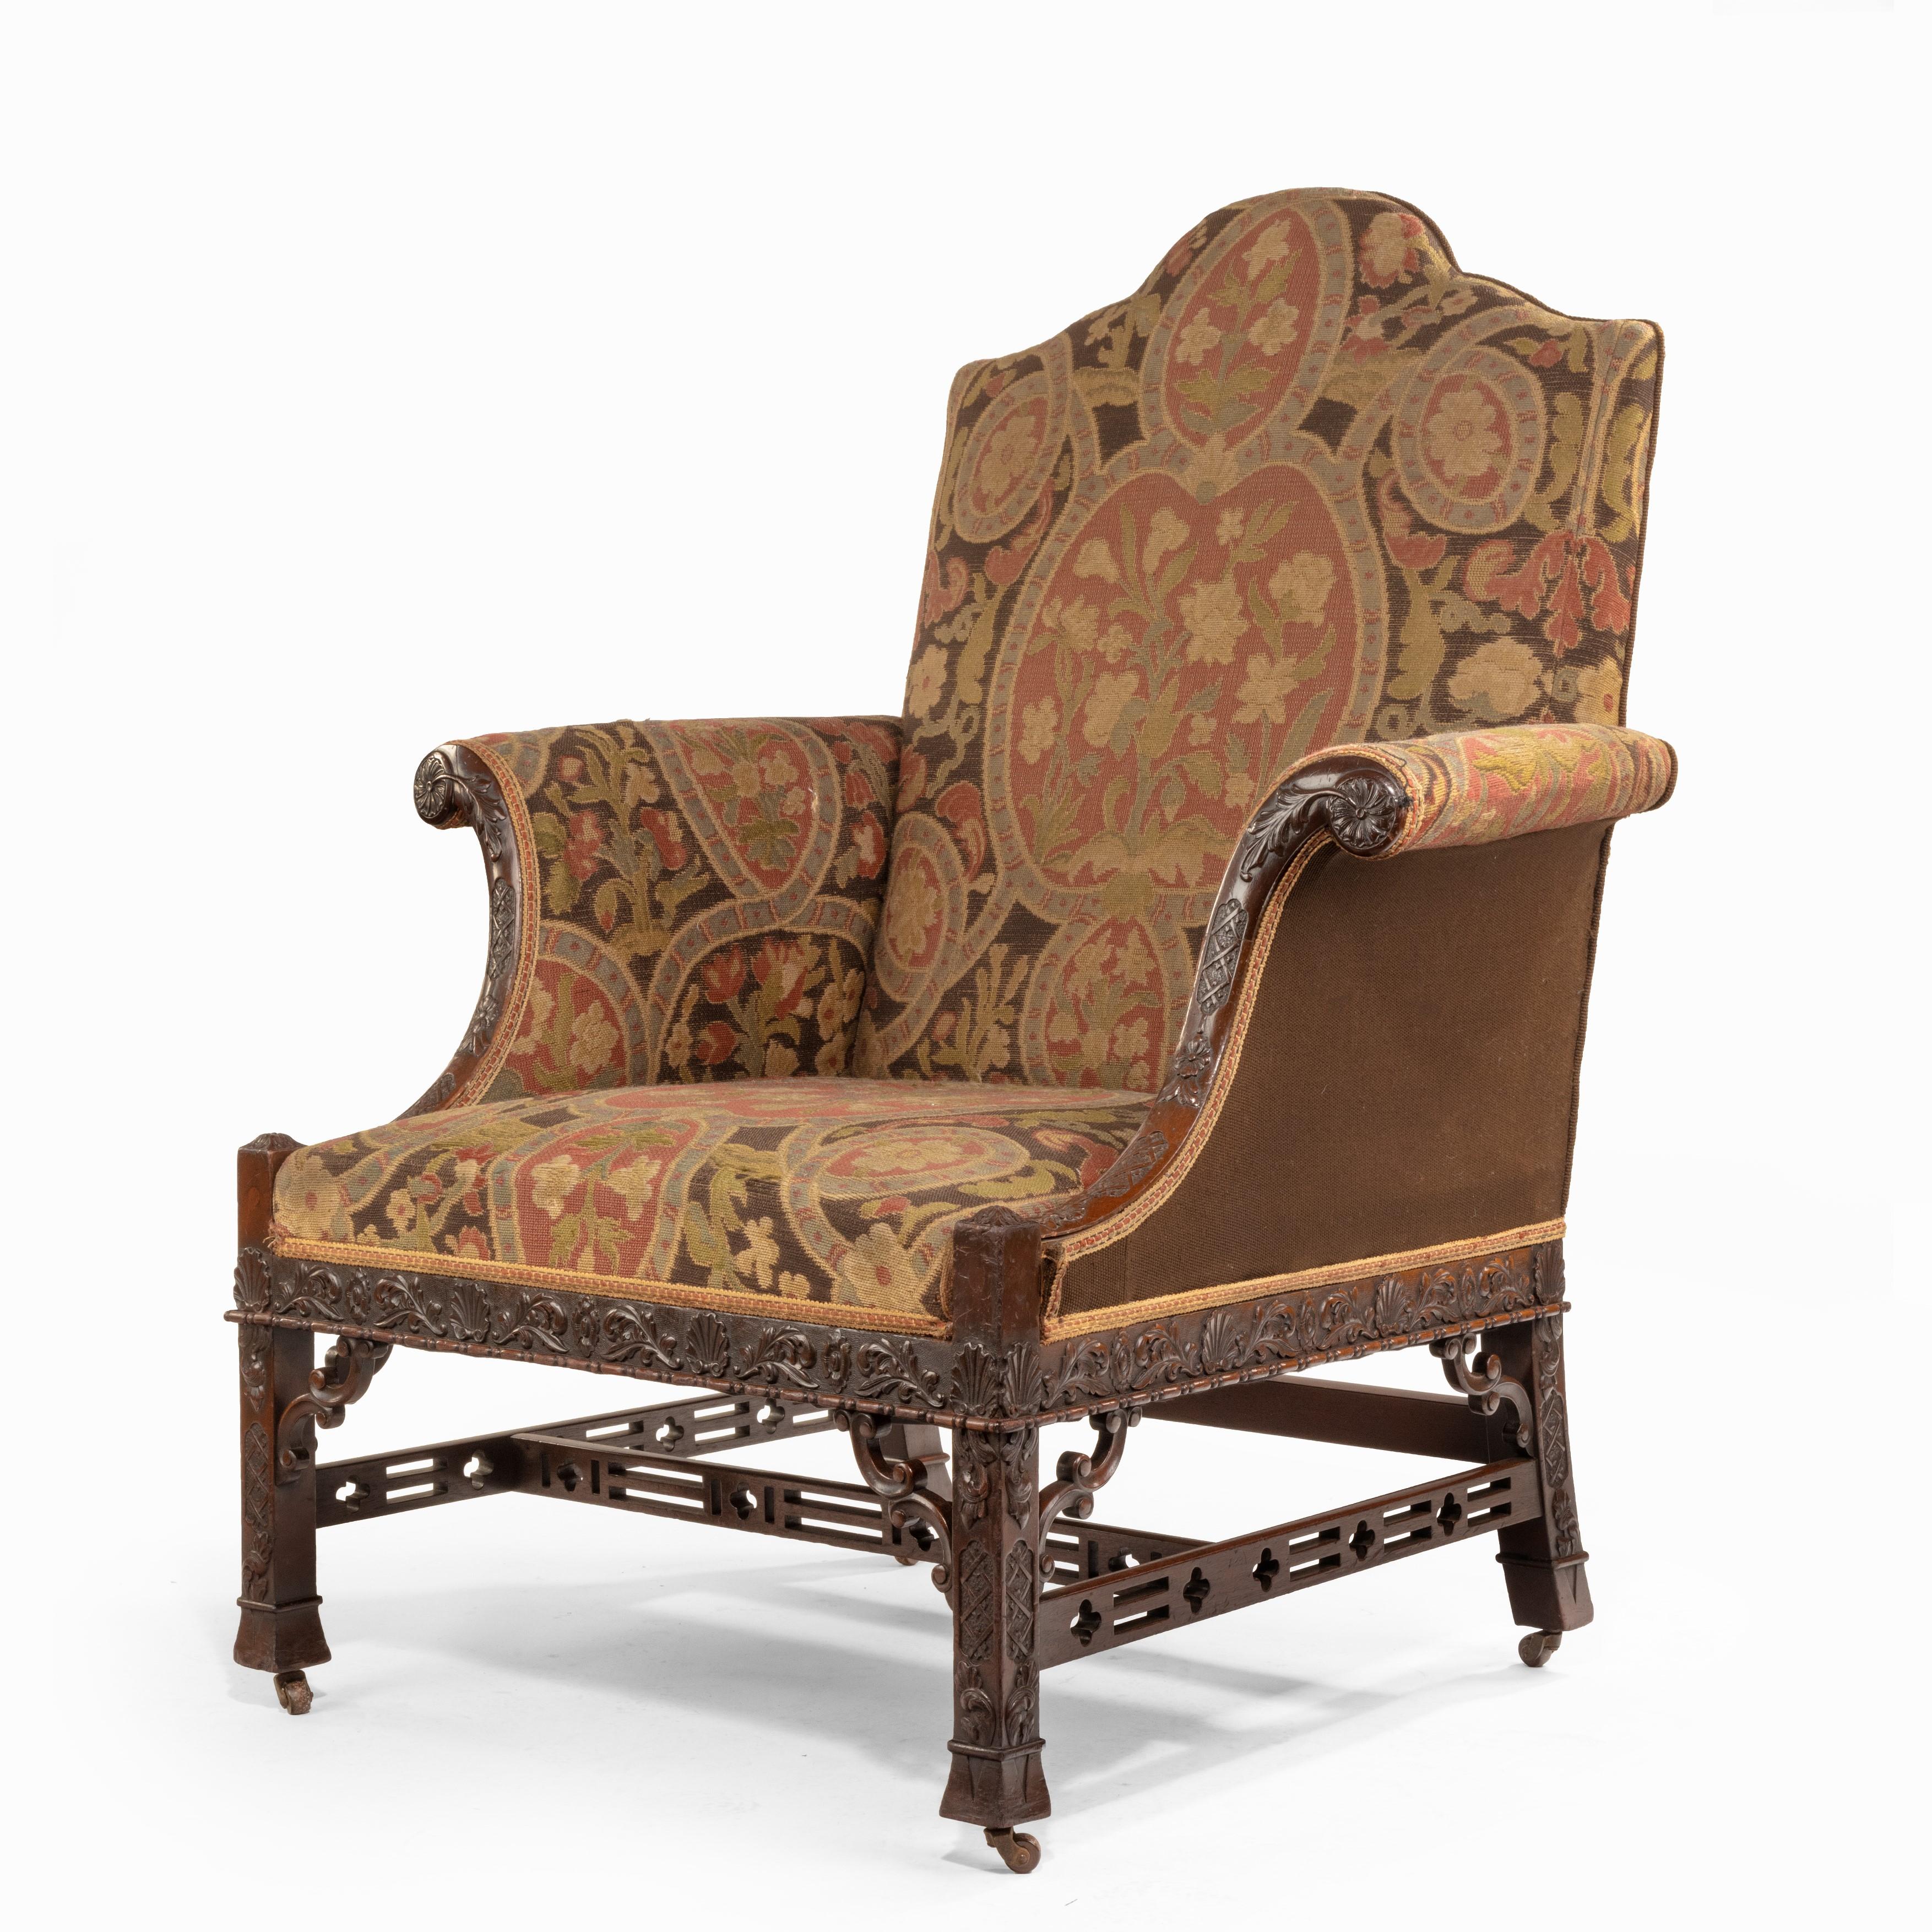 A late Victorian oversized armchair in the Chippendale manner, the scrolling mahogany arms, seat rail and legs carved with scrolling tendrils and anthemion heads, with double C-scroll spandrels and pierced stretchers, with the original needlework